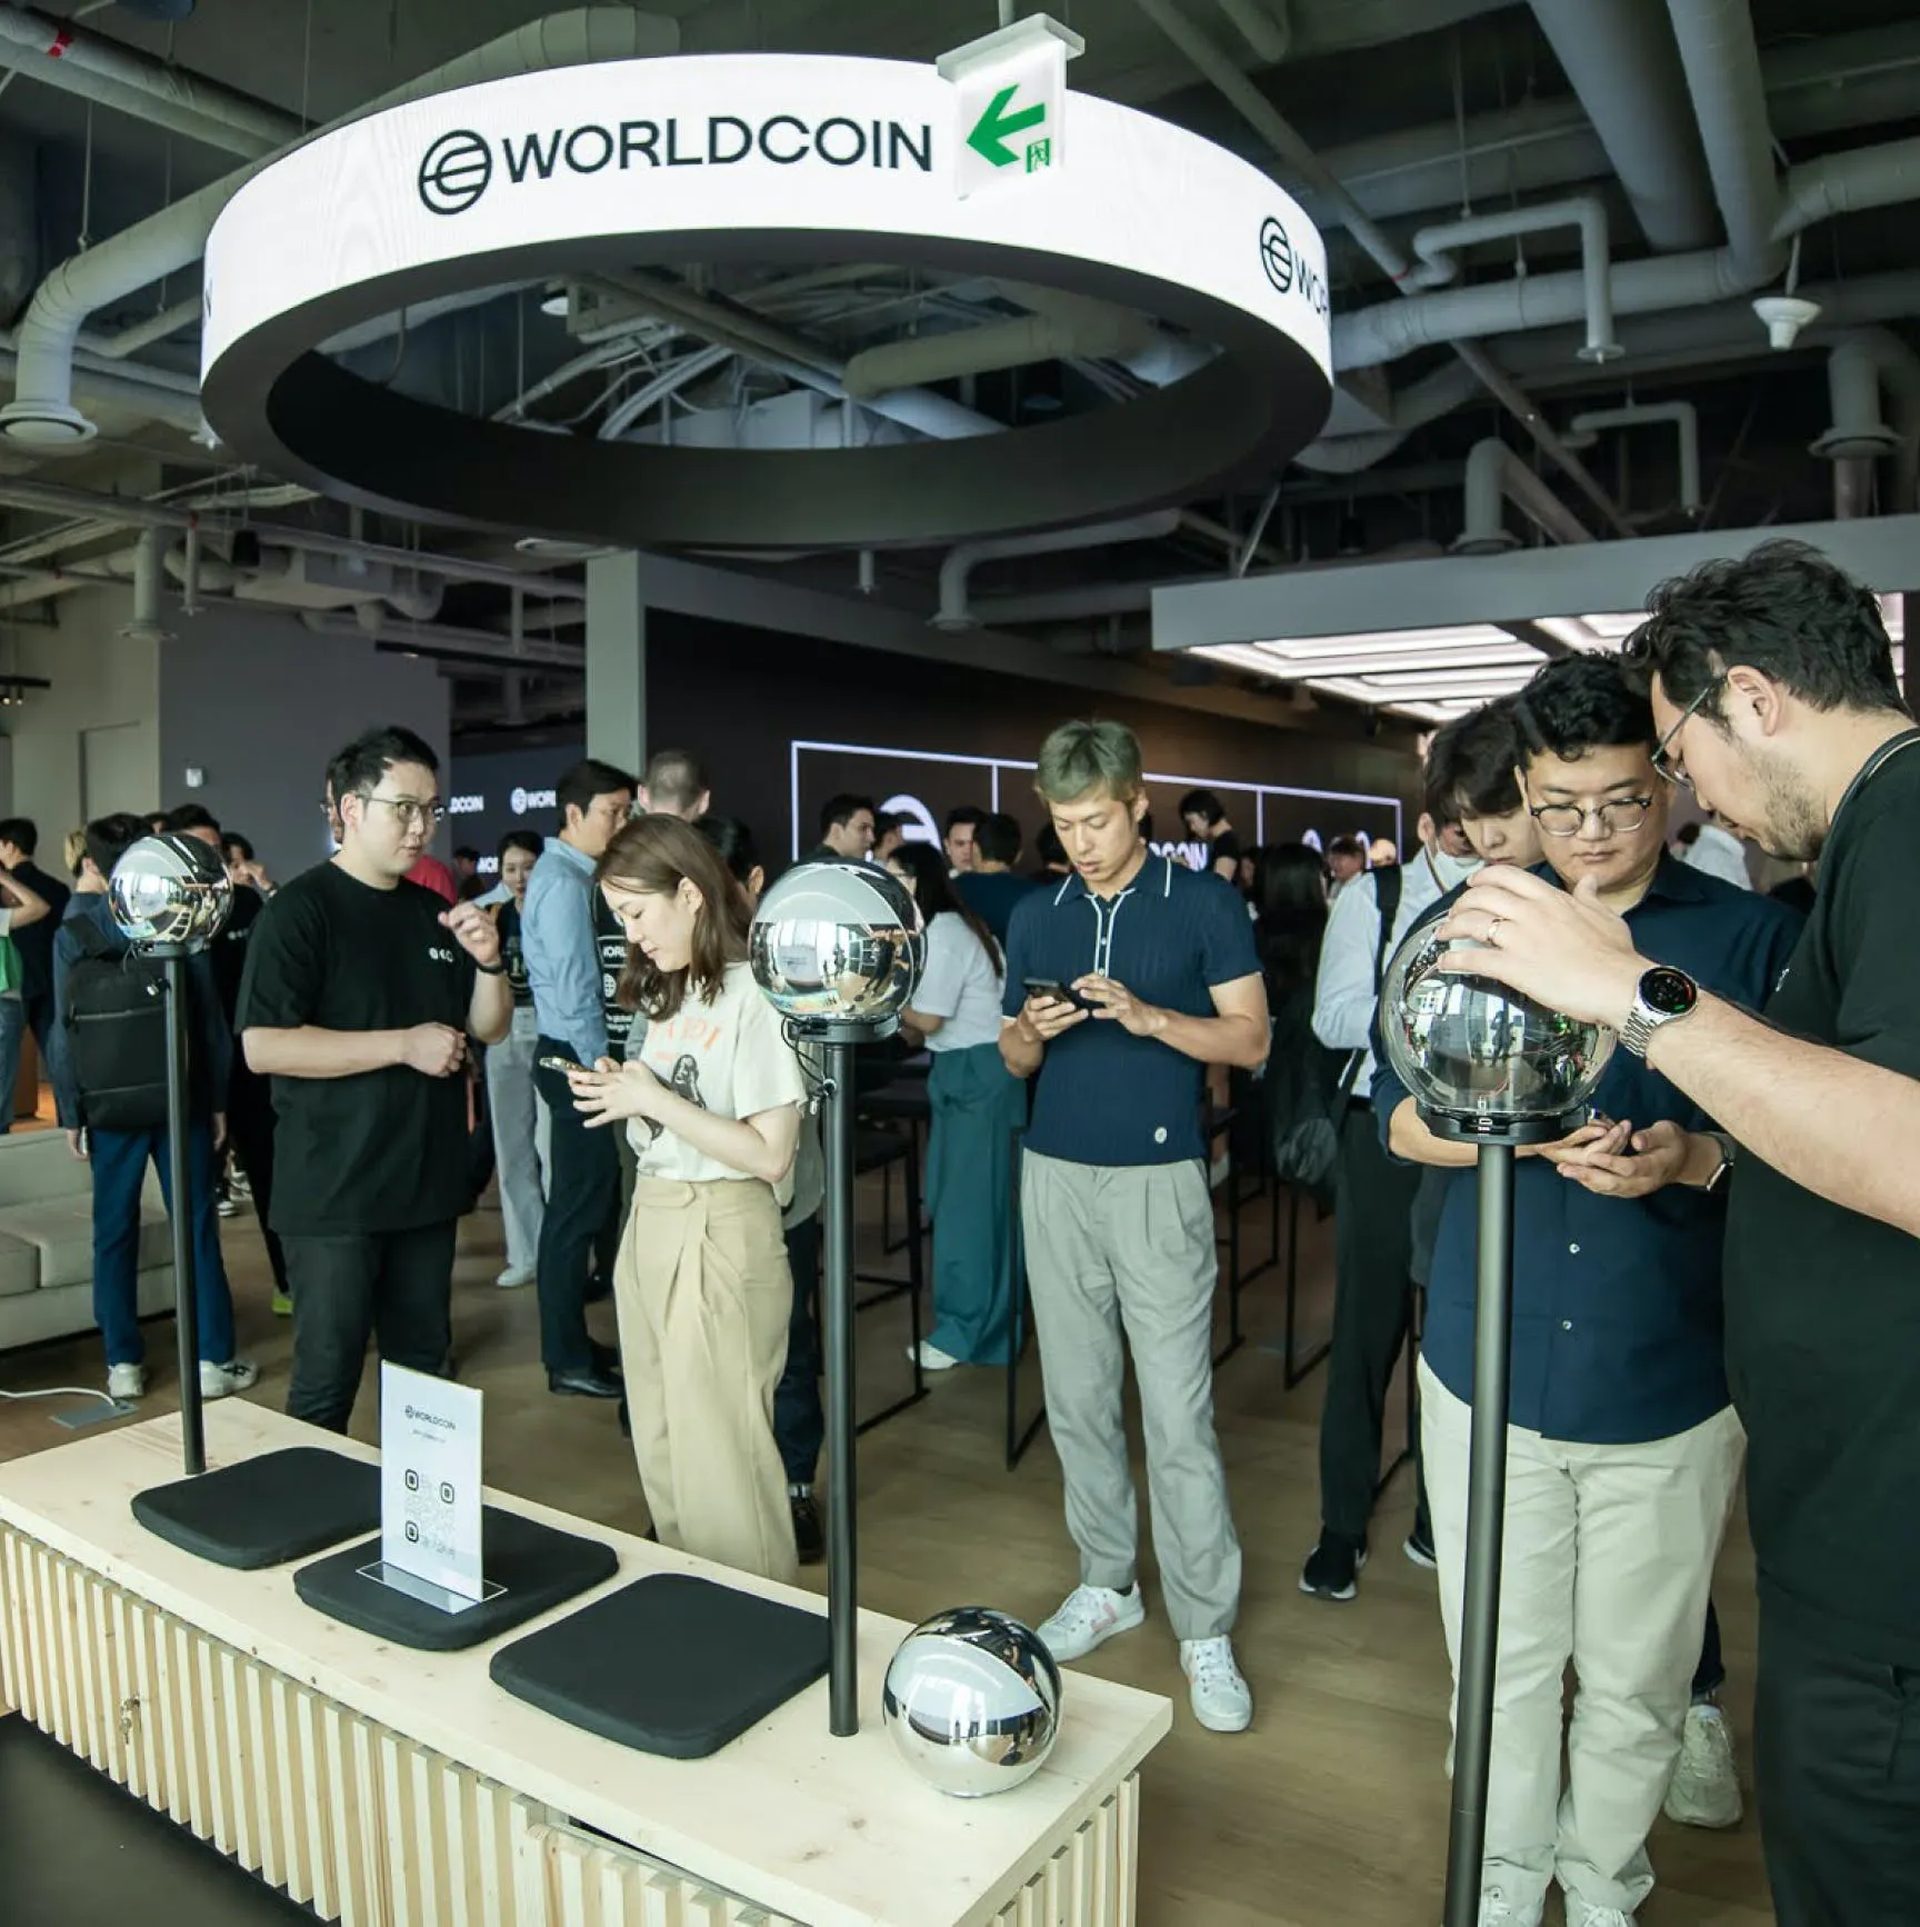 What is Worldcoin Orb? Keep reading and explore everything you need to know about the eye scanner. Does Worldcoin hurt? Let's find out!